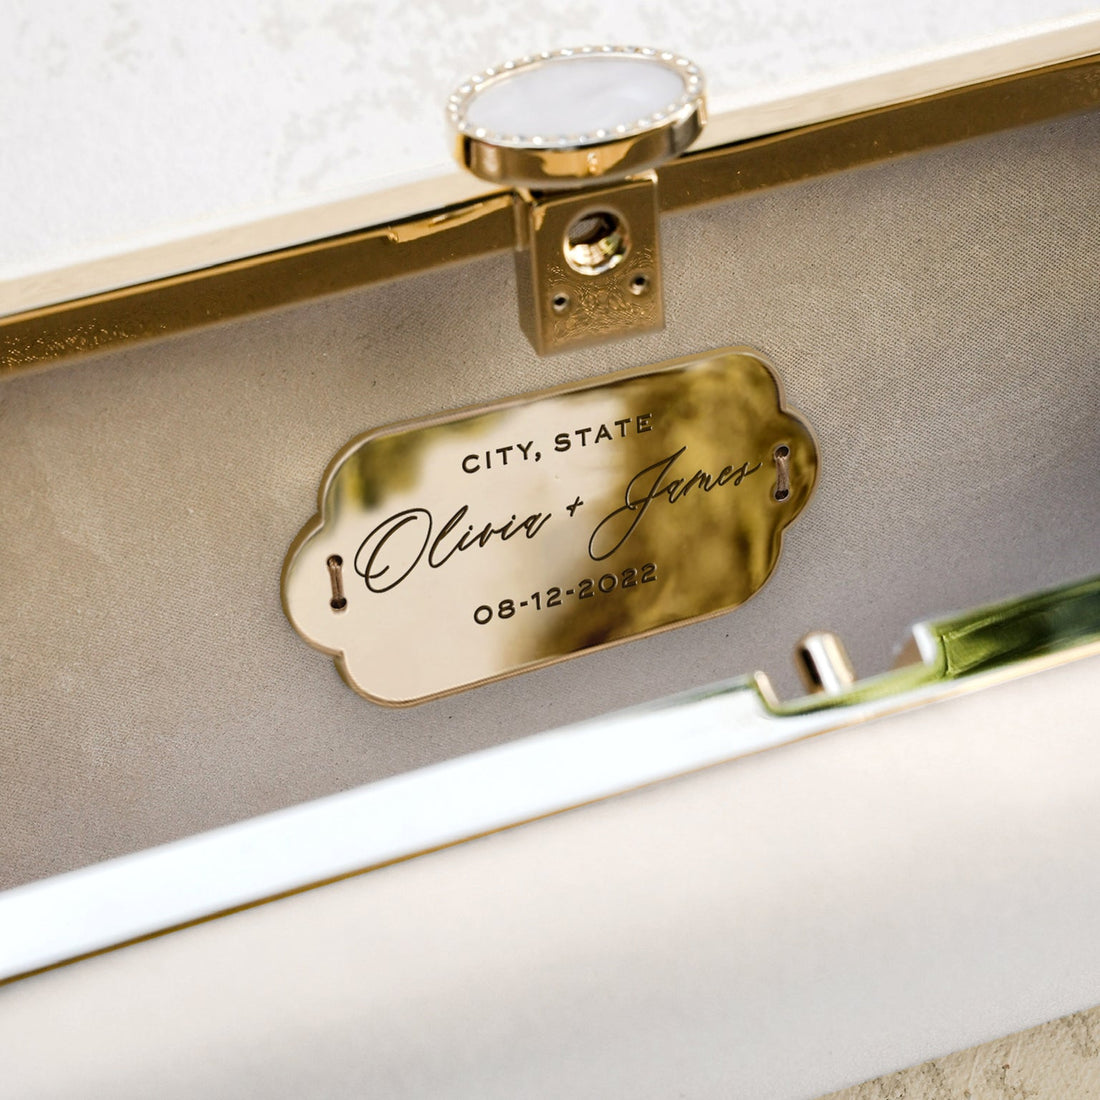 An Ivory Satin Bella Fiori Clutch from The Bella Rosa Collection, adorned with a name tag, made of duchess satin.